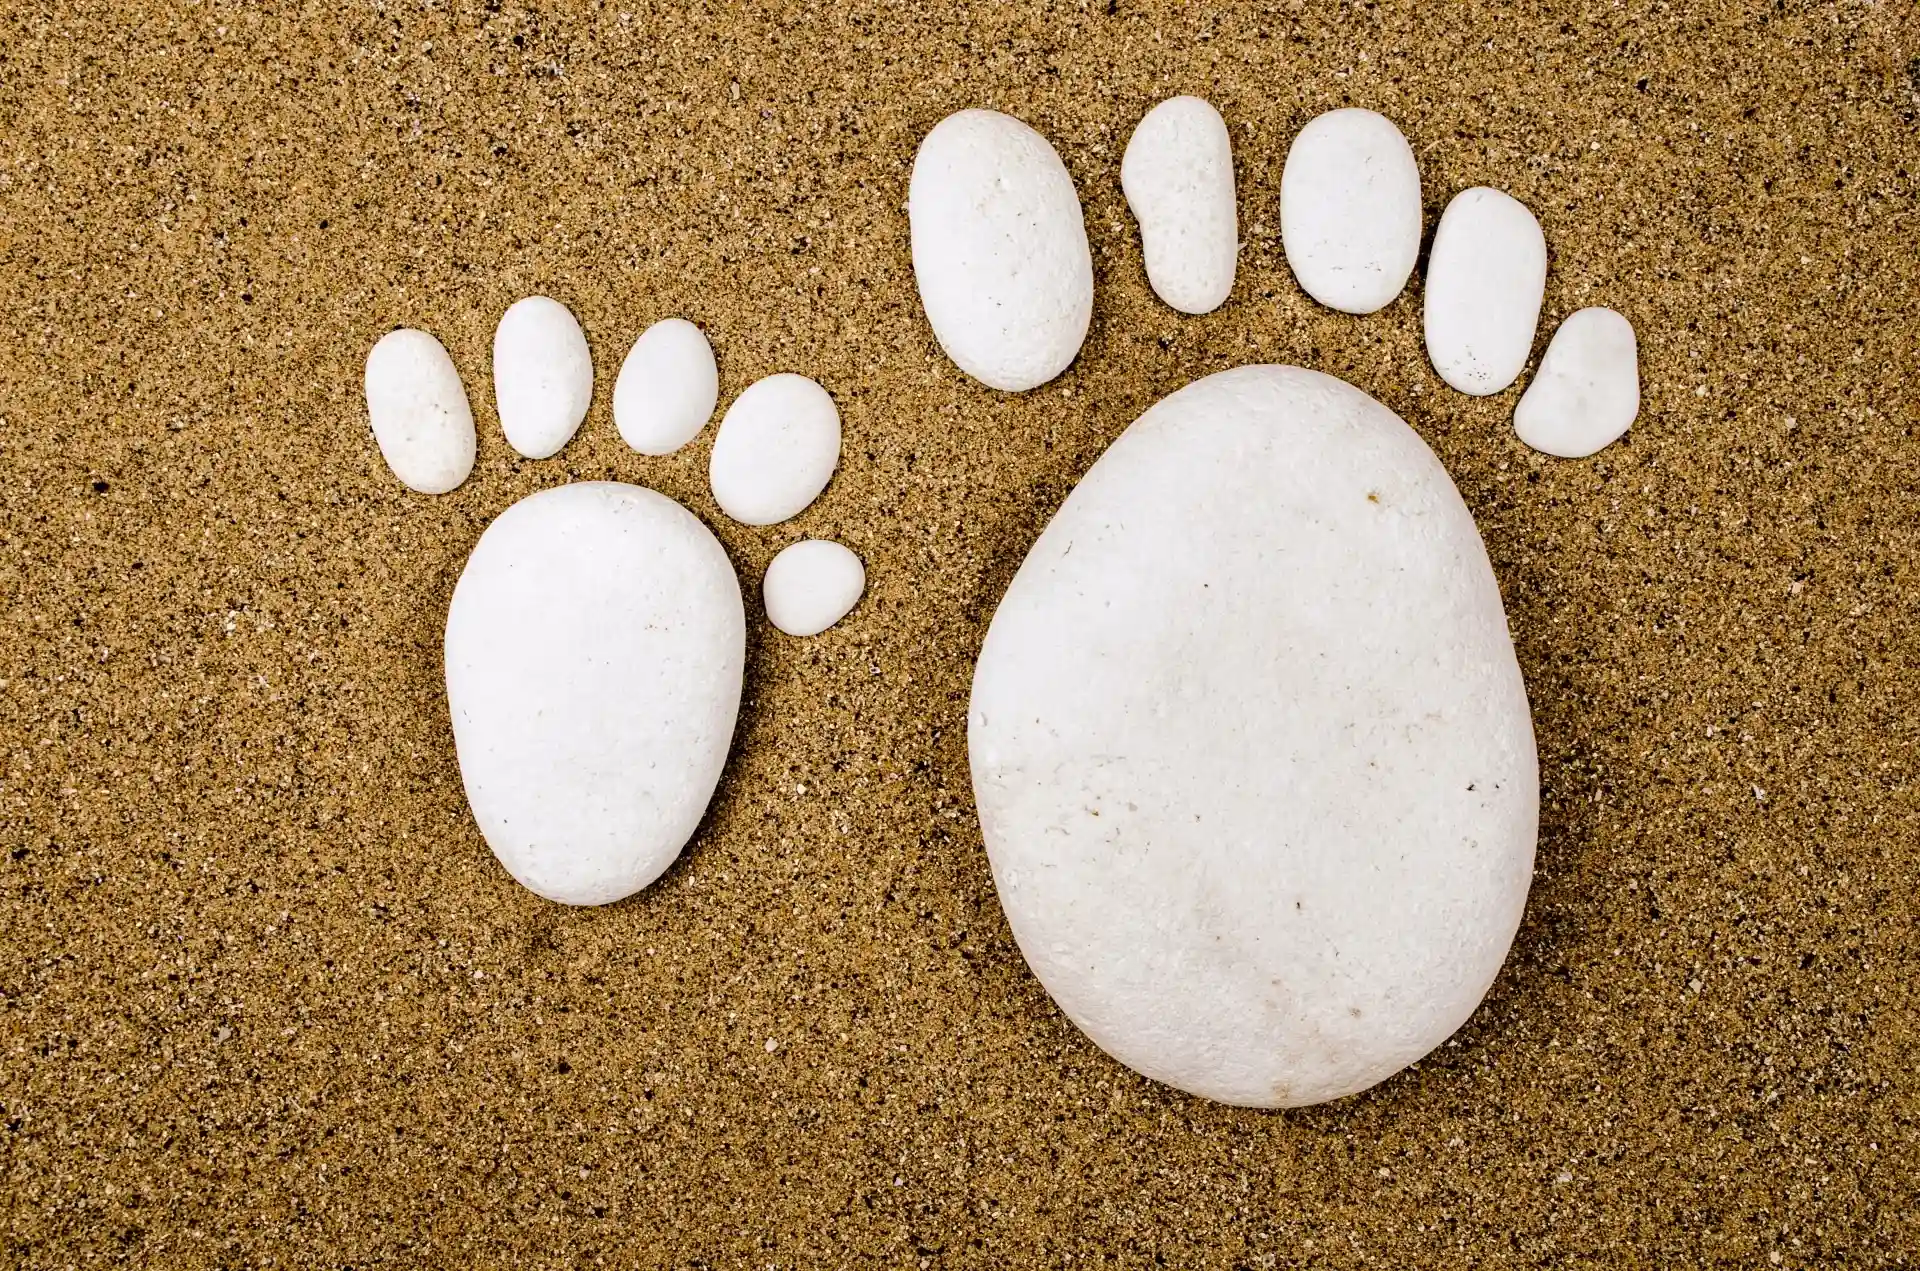 baby and adult feet made from stones laid out in sand